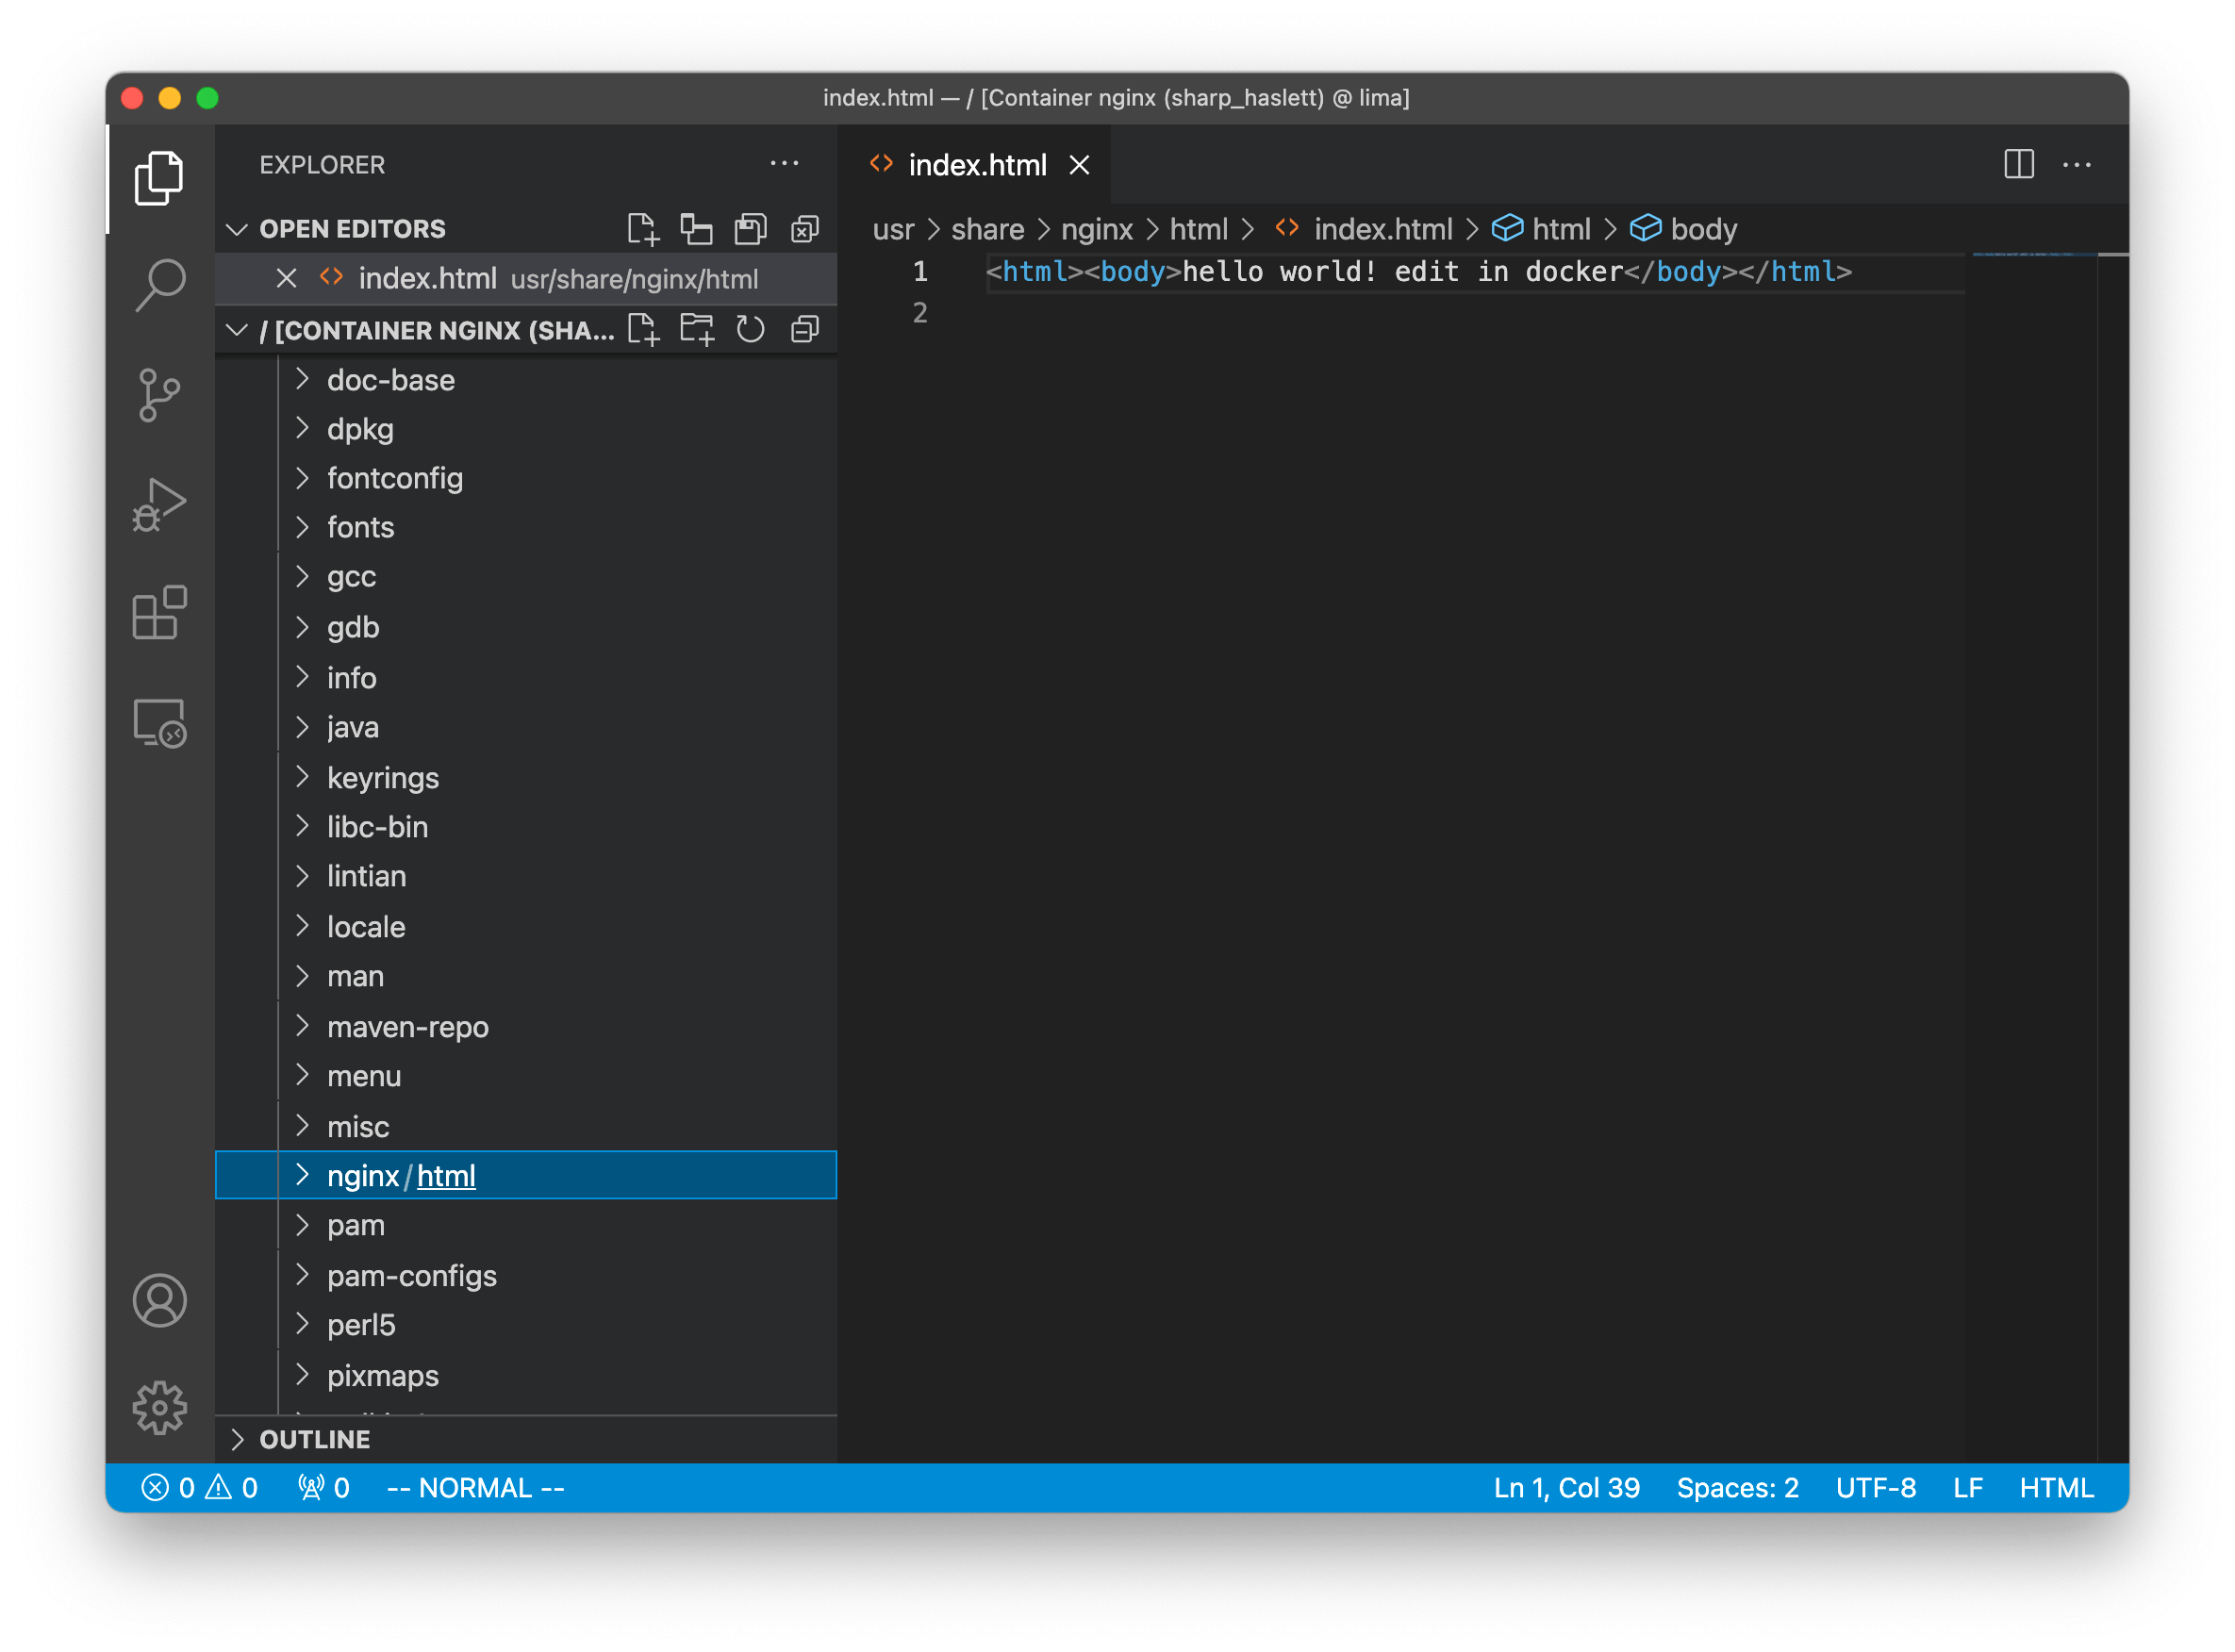 Editing an file on remote container in VS Code